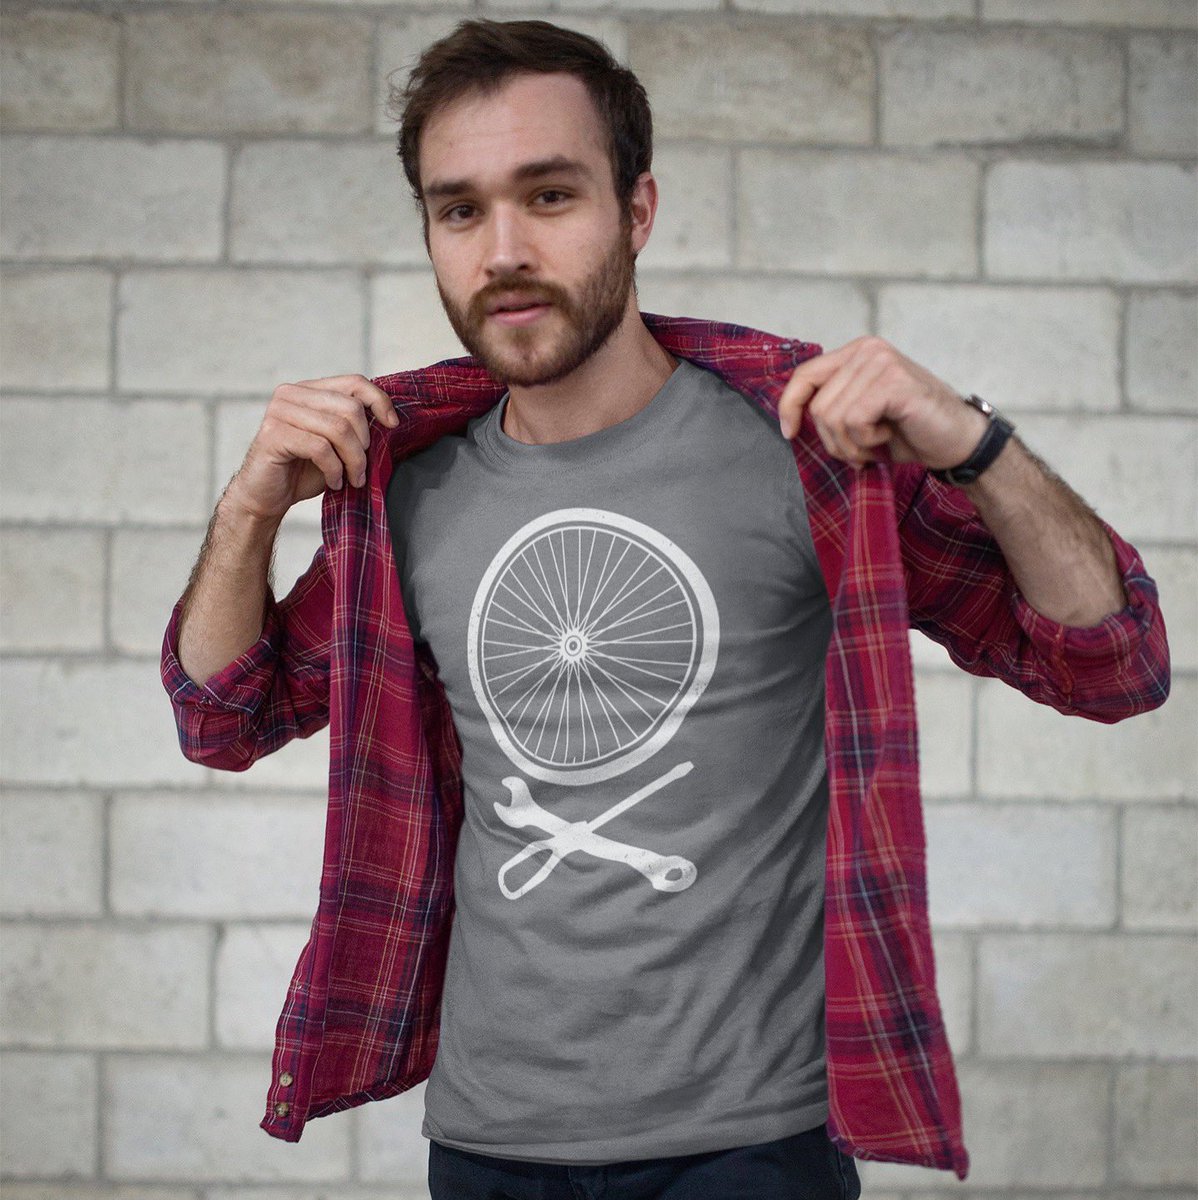 It's a fact, life is better with bicycles! So let's roll with this cool #bicycle lovers t-shirt #giftidea! It’s available in our #Etsy shop! etsy.com/shop/Inkybrain… #graphictee #tshirtdesign #menwear #menfashion #urbanstyle #streetfashion #hipsterfashion #giftforhim #fashionlook